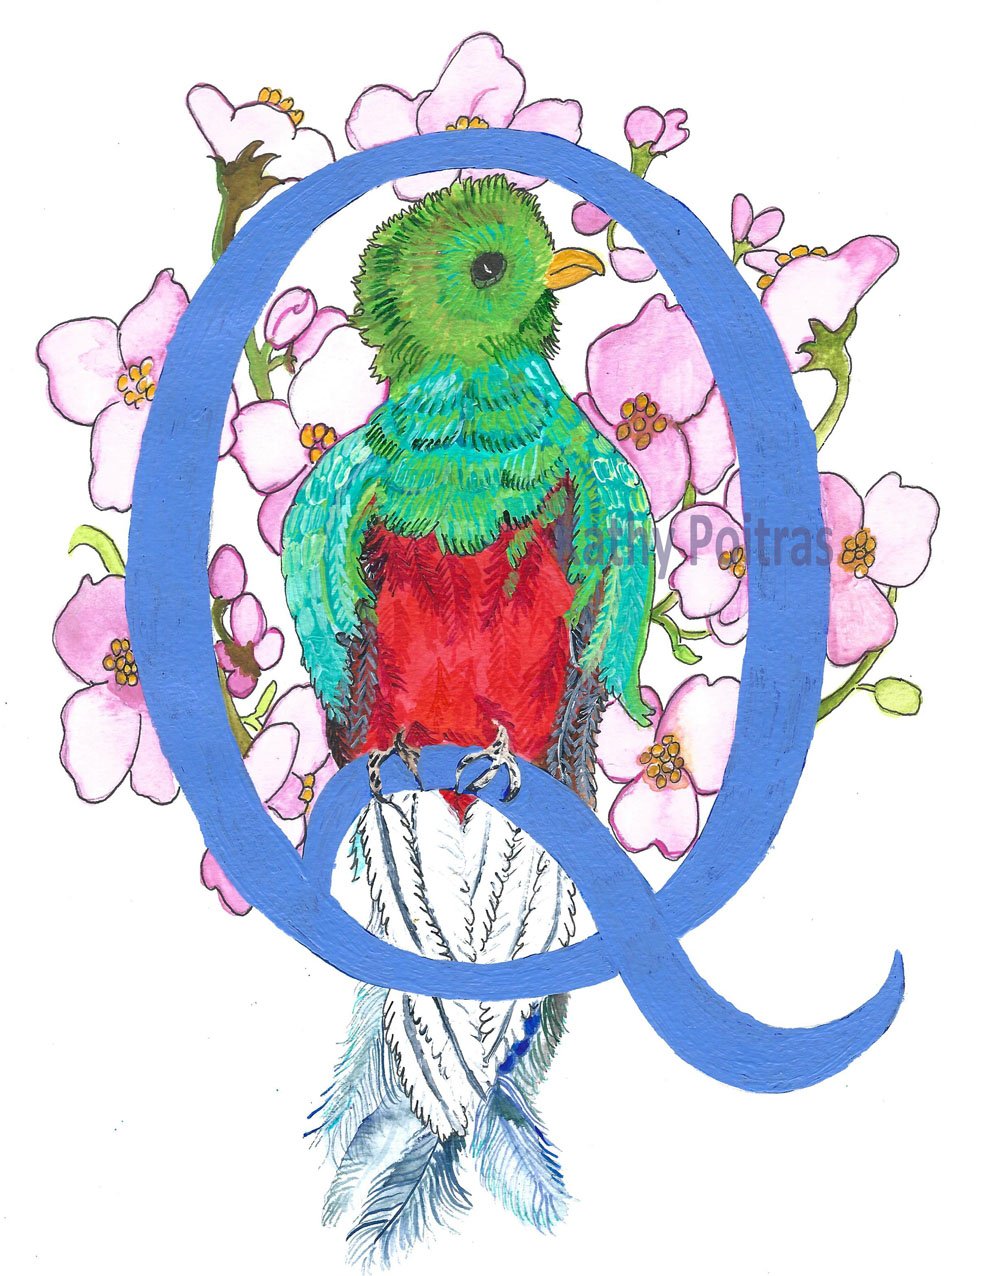 Hand made photographic Personalized Greeting Card. Illustrated Letter Q for Quetzal and Quince by artist Kathy Poitras